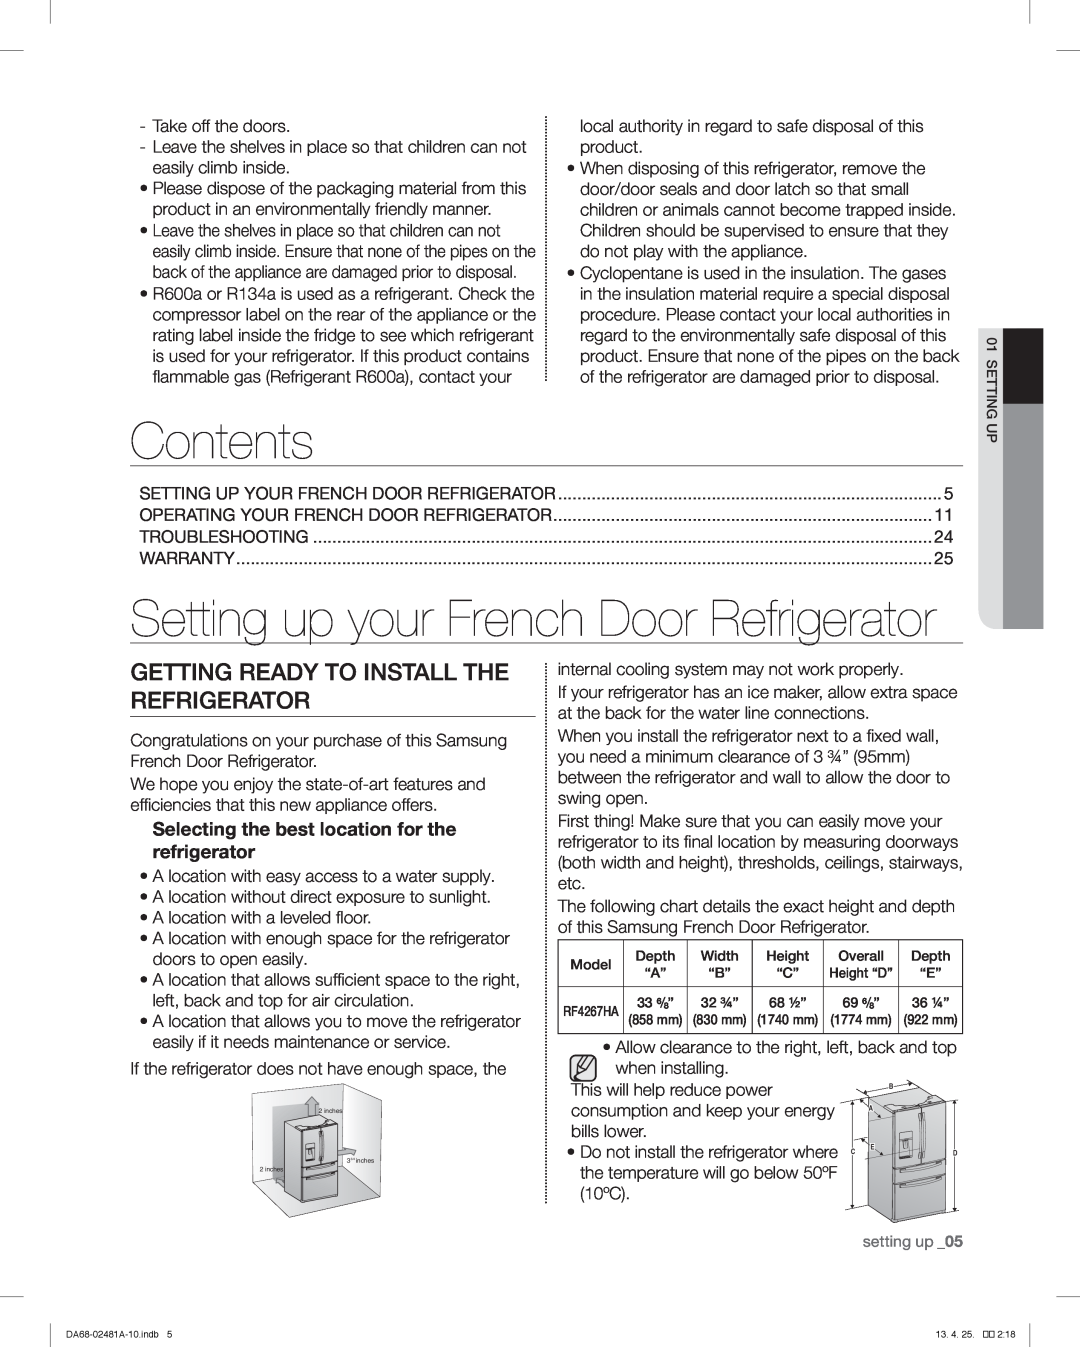 Samsung RF4267HAWP Contents, Setting up your French Door Refrigerator, Getting Ready To Install The Refrigerator 